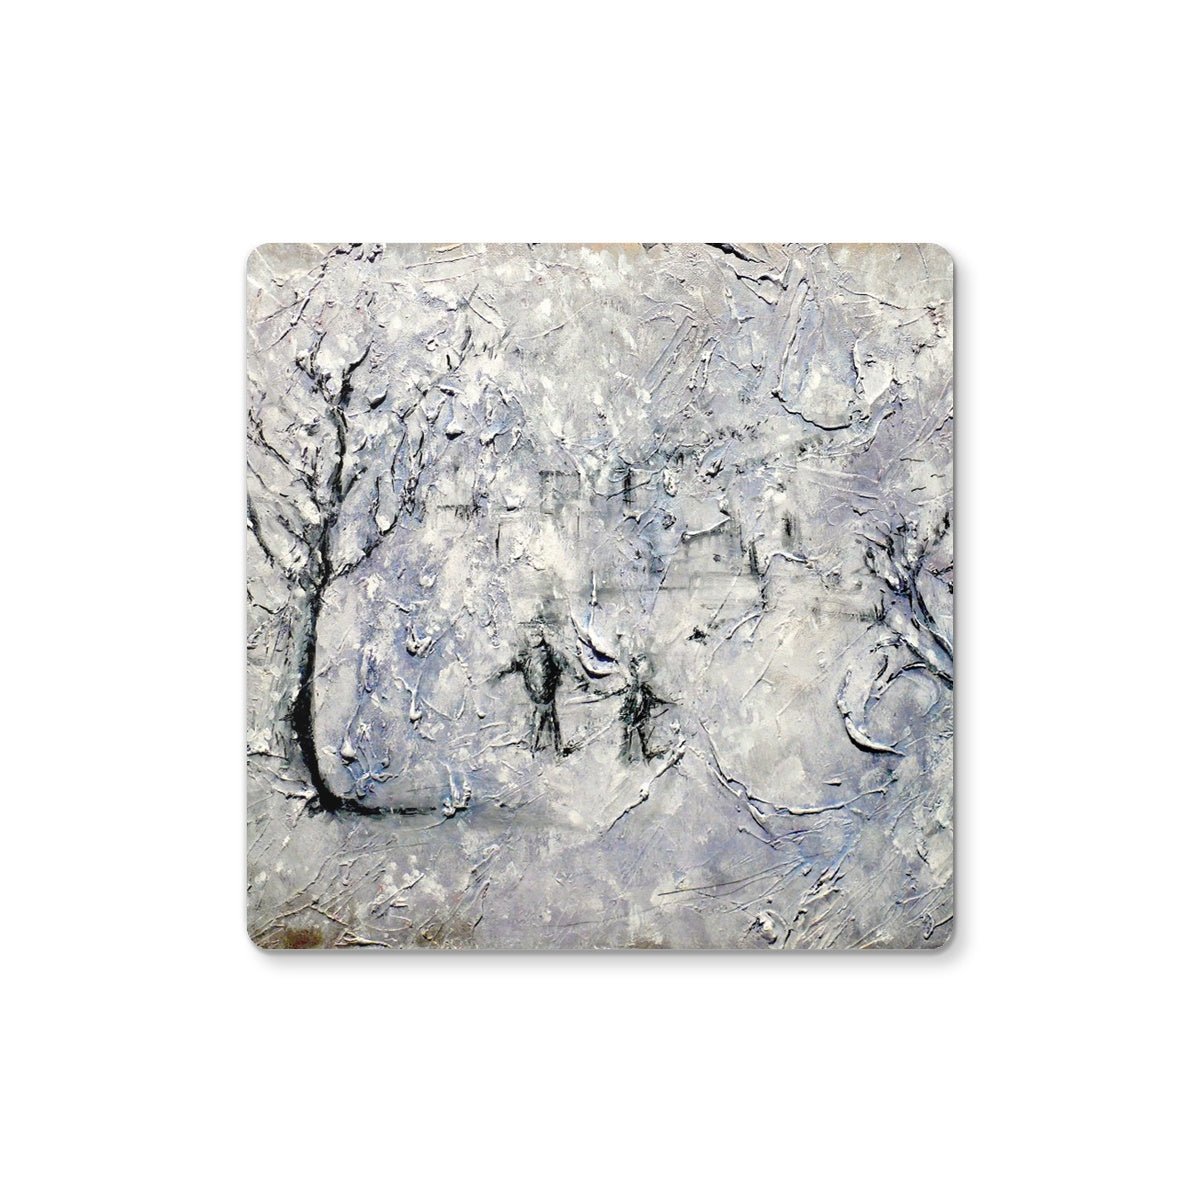 Father Daughter Snow Art Gifts Coaster-Coasters-Abstract & Impressionistic Art Gallery-6 Coasters-Paintings, Prints, Homeware, Art Gifts From Scotland By Scottish Artist Kevin Hunter